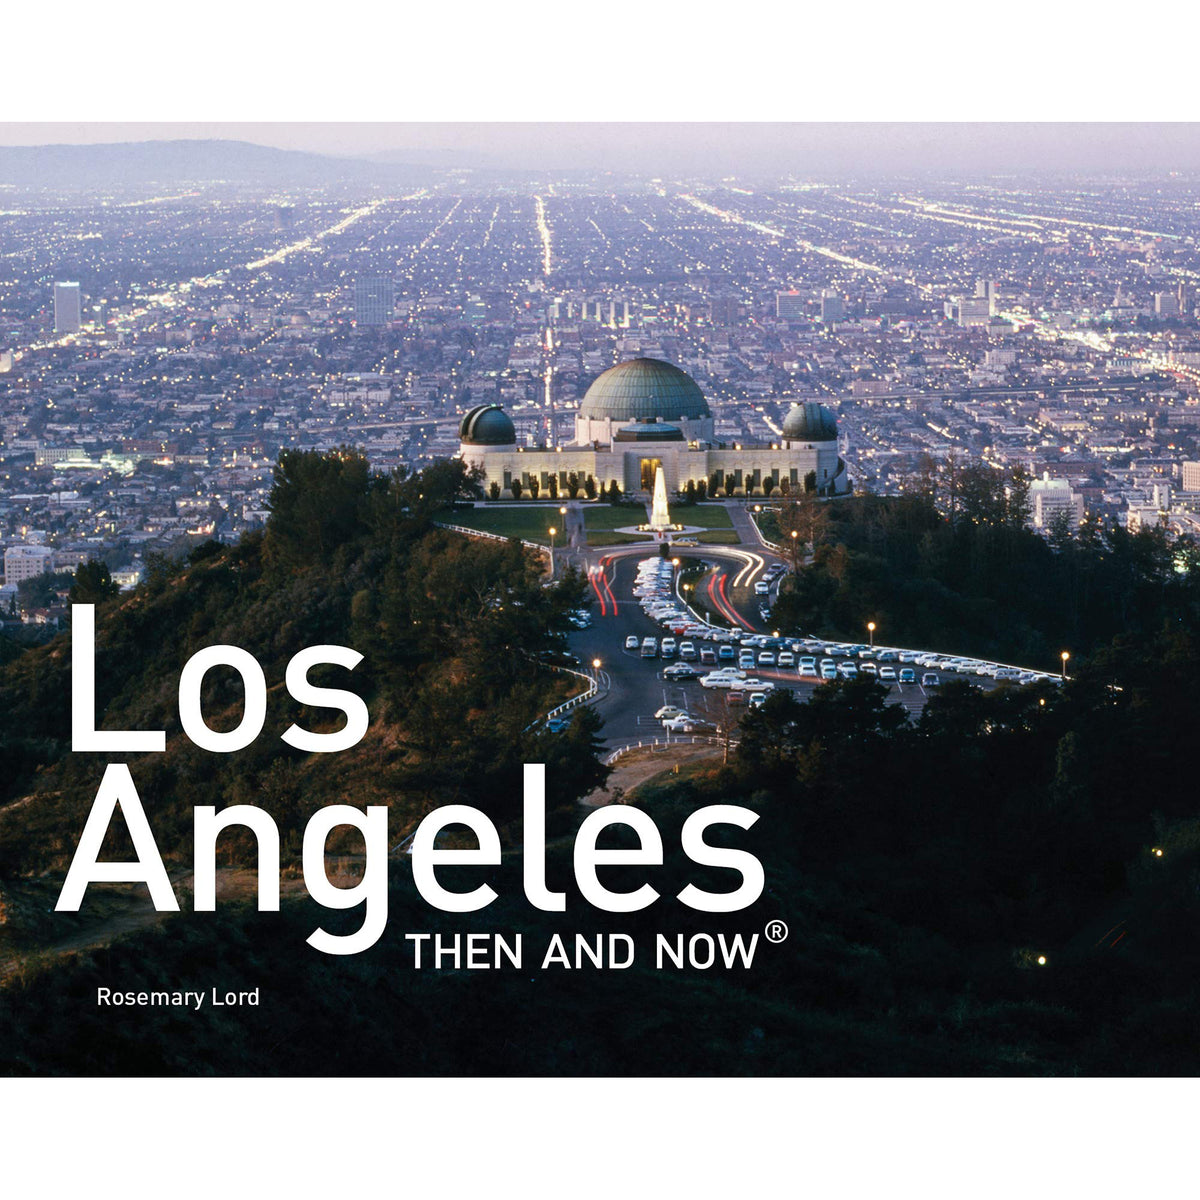 Los Angeles: Then and Now - New Mini Edition